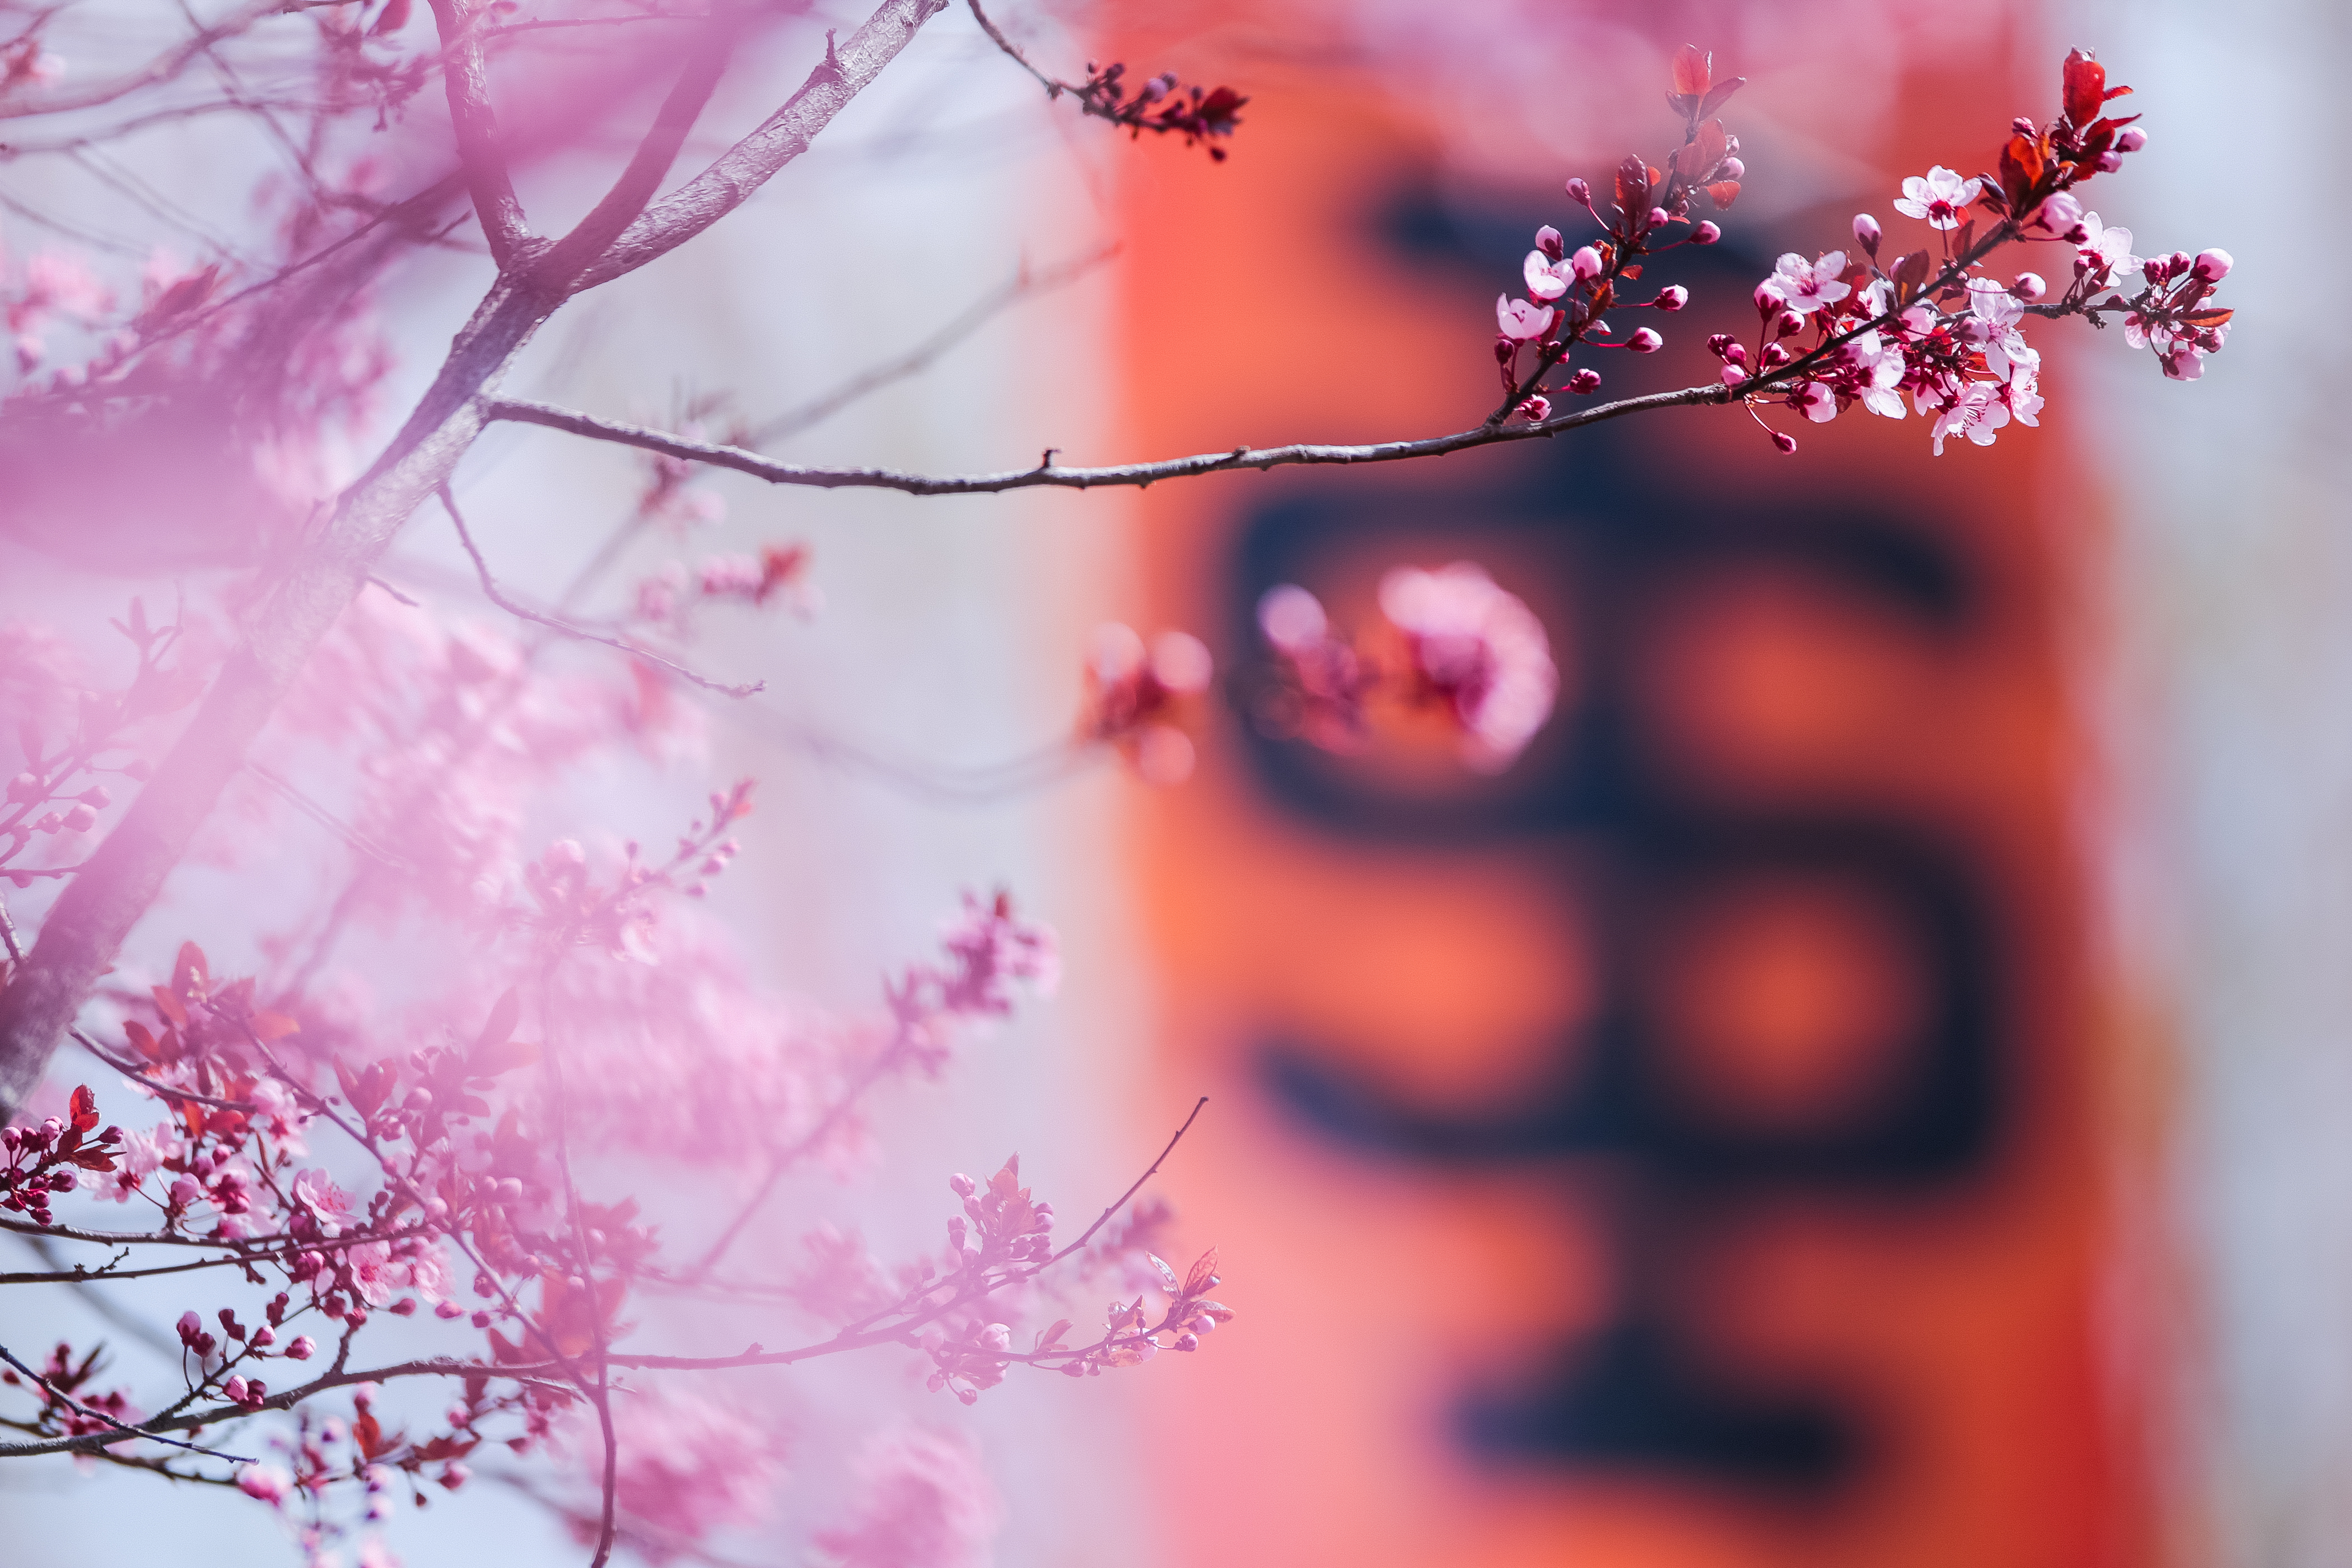 A spring cherry blossom in the foreground, with an ISU mark in the background.